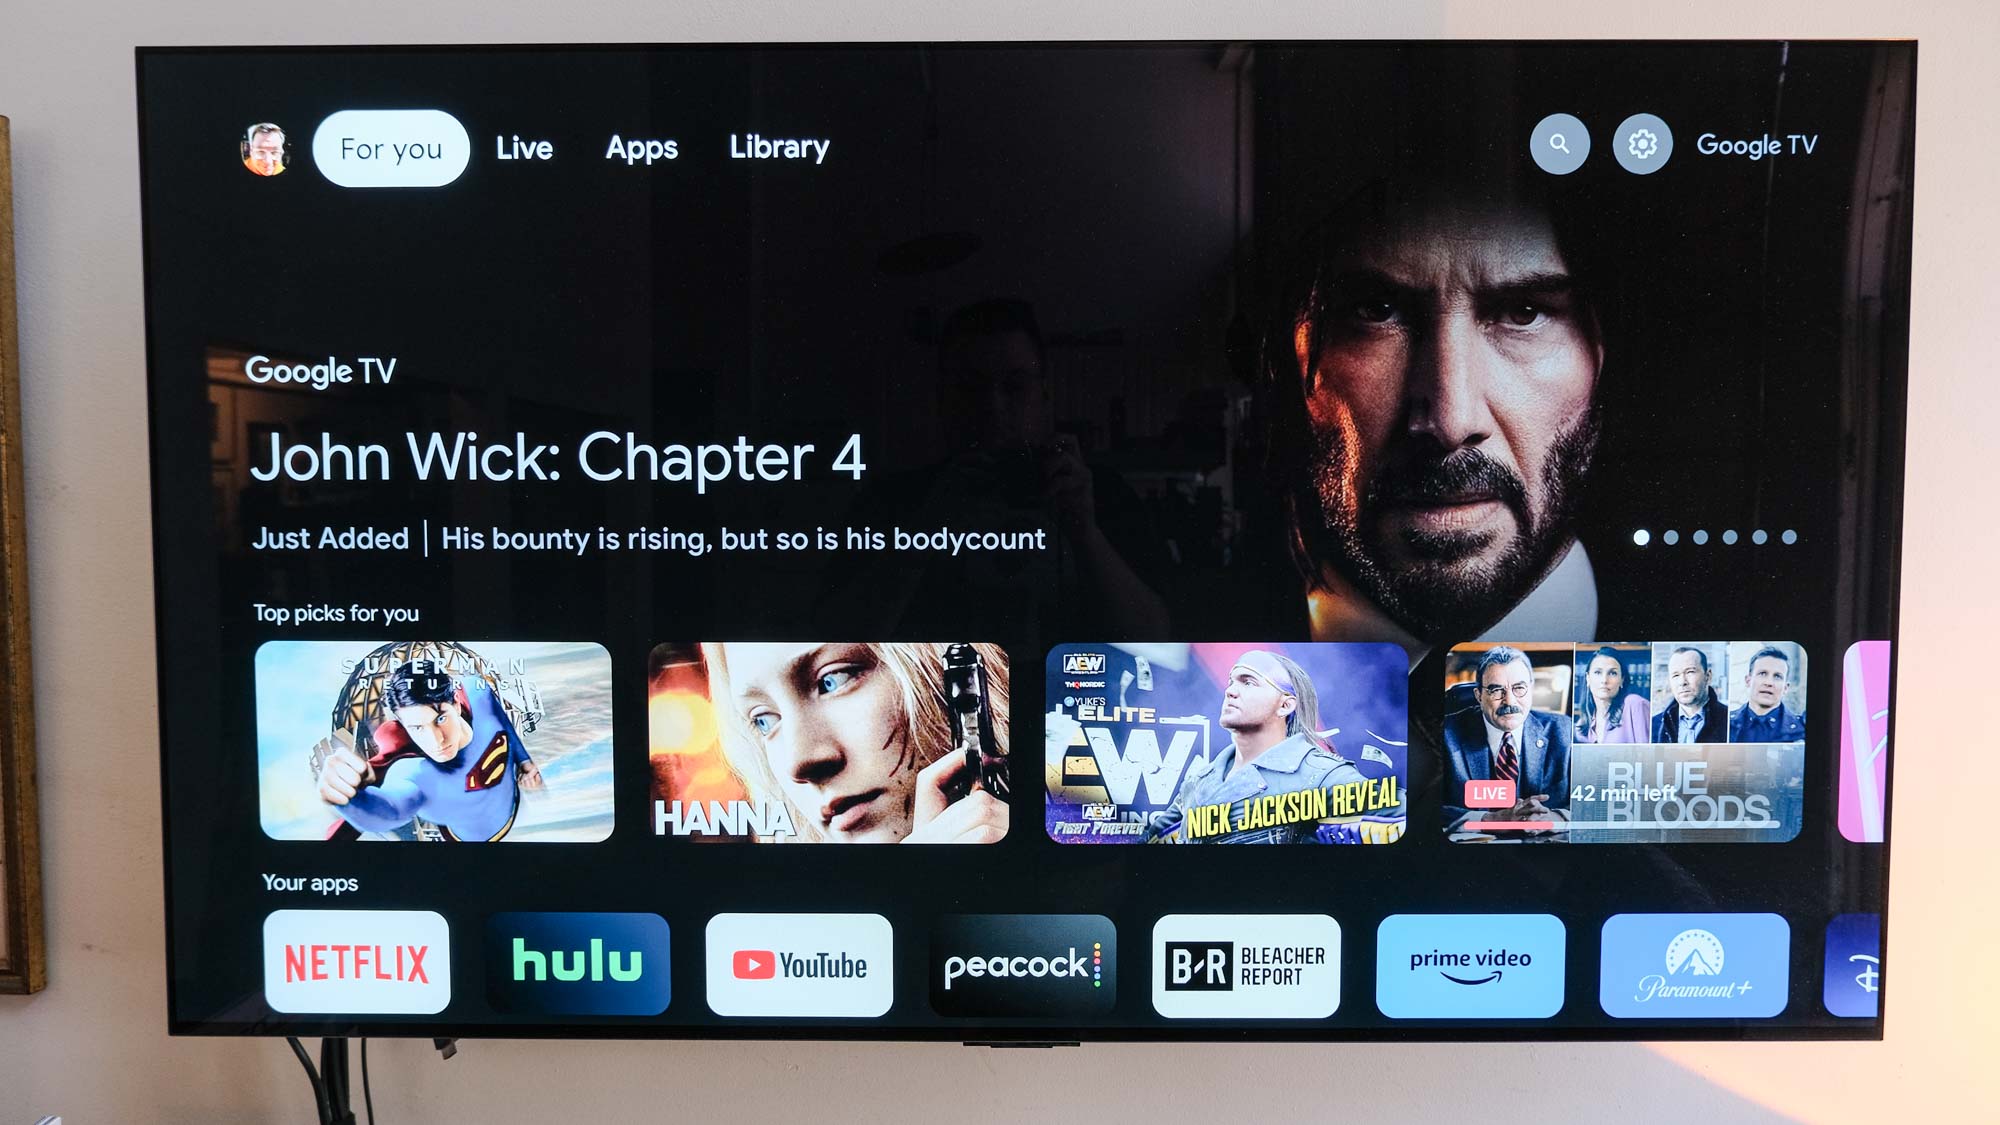 The TV is showing a promo for John Wick on the Google TV home screen coming from the Google TV 4K webcast box